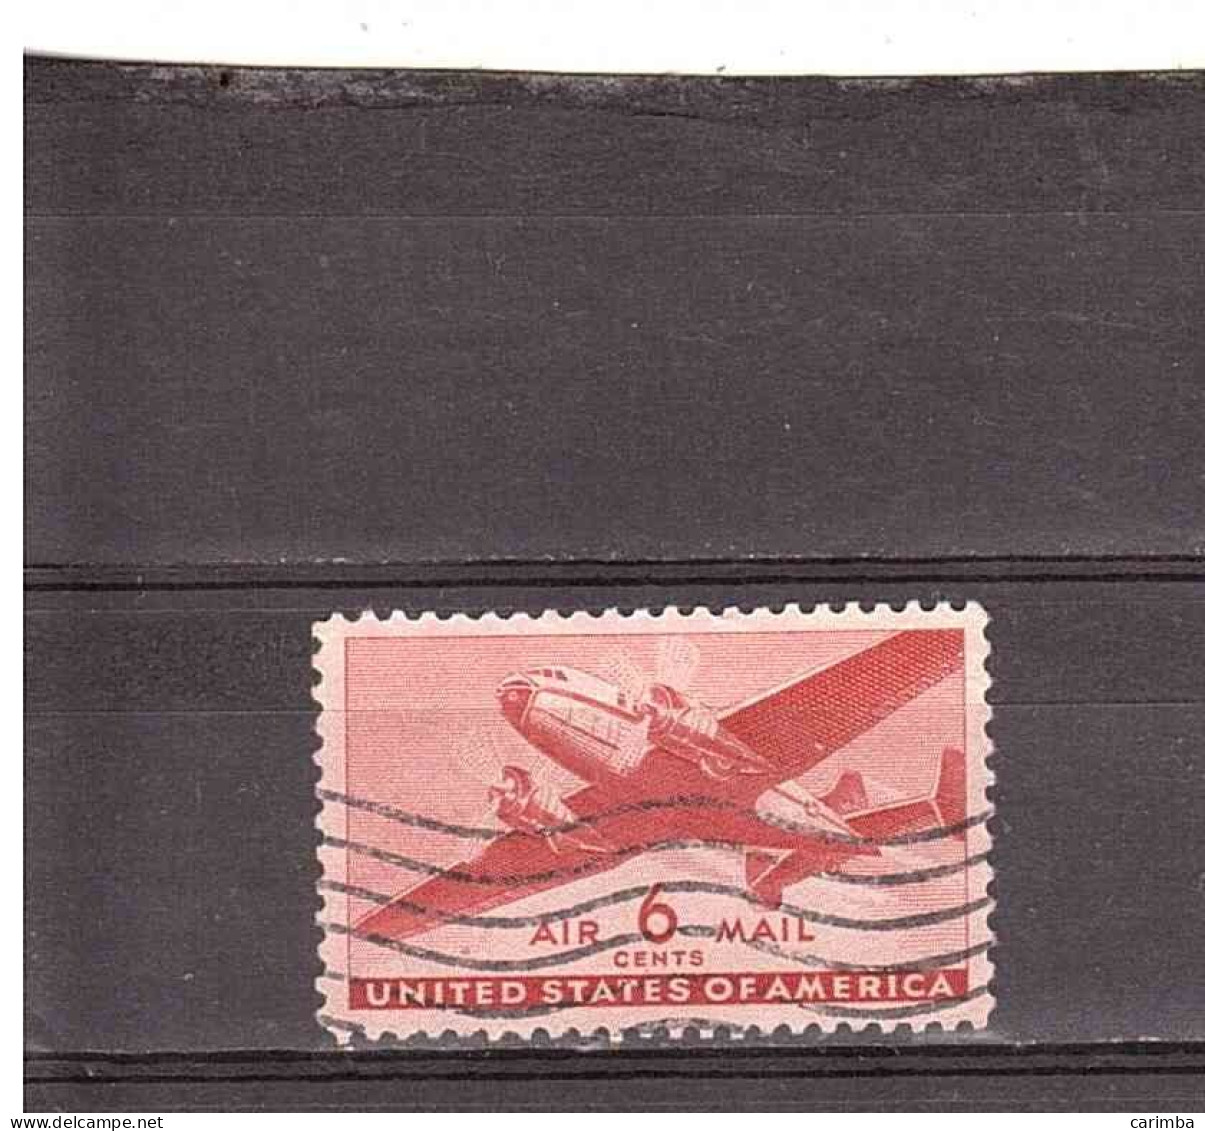 AIR MAIL 6 CENTS - 2a. 1941-1960 Usati